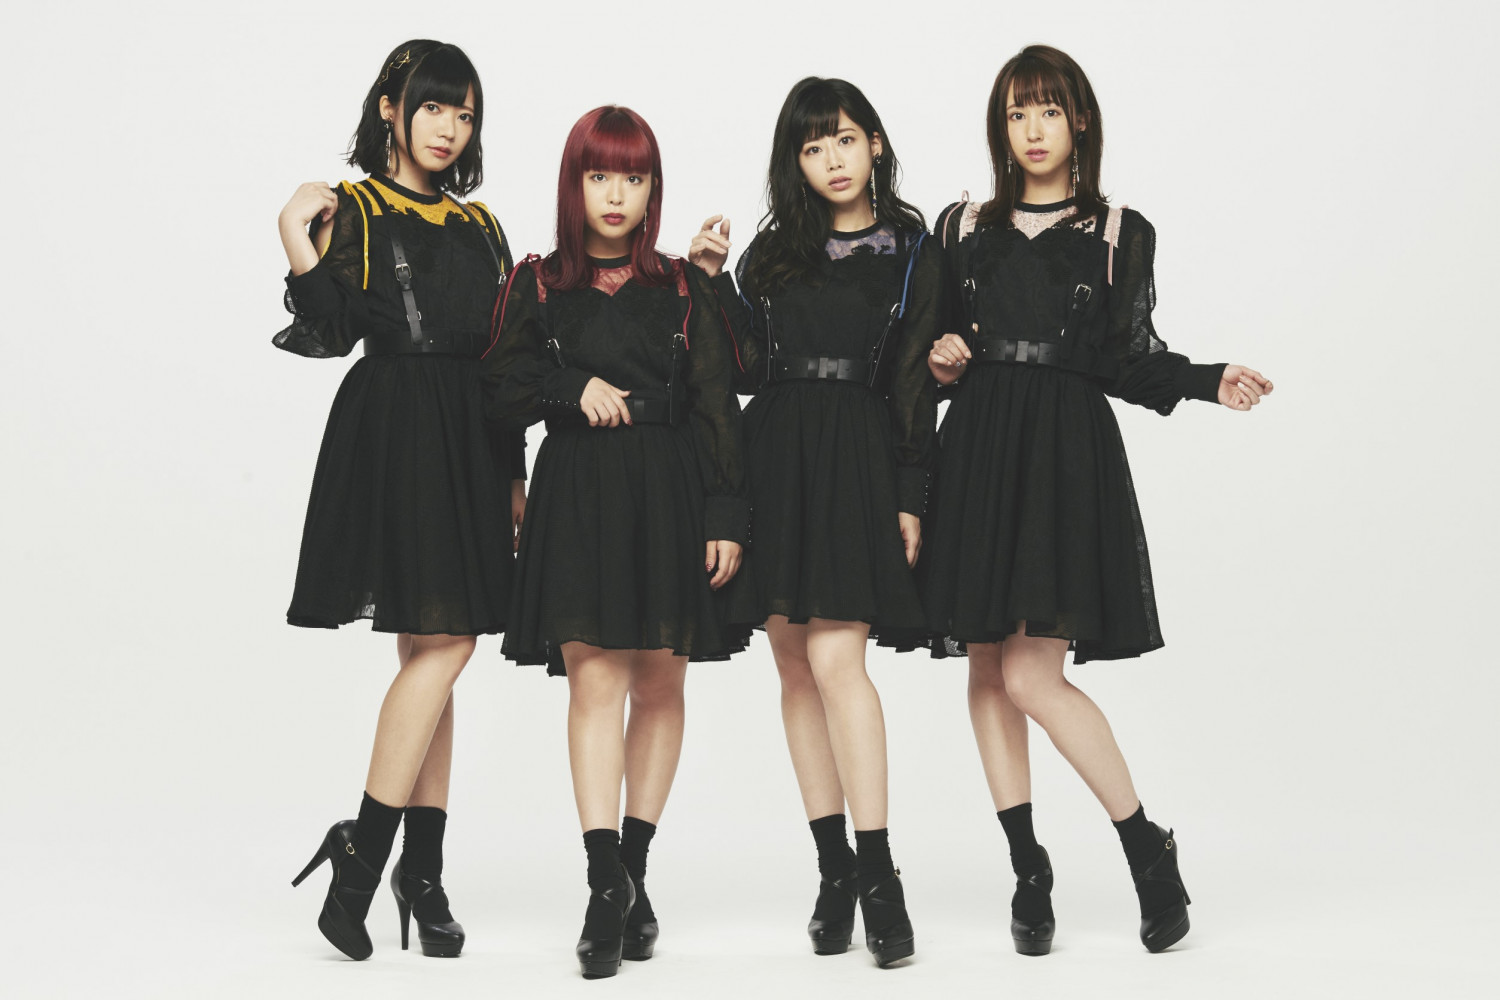 It’s a New Day for The Dance for Philosophy in the MV for “Hajimemashite Mirai”!